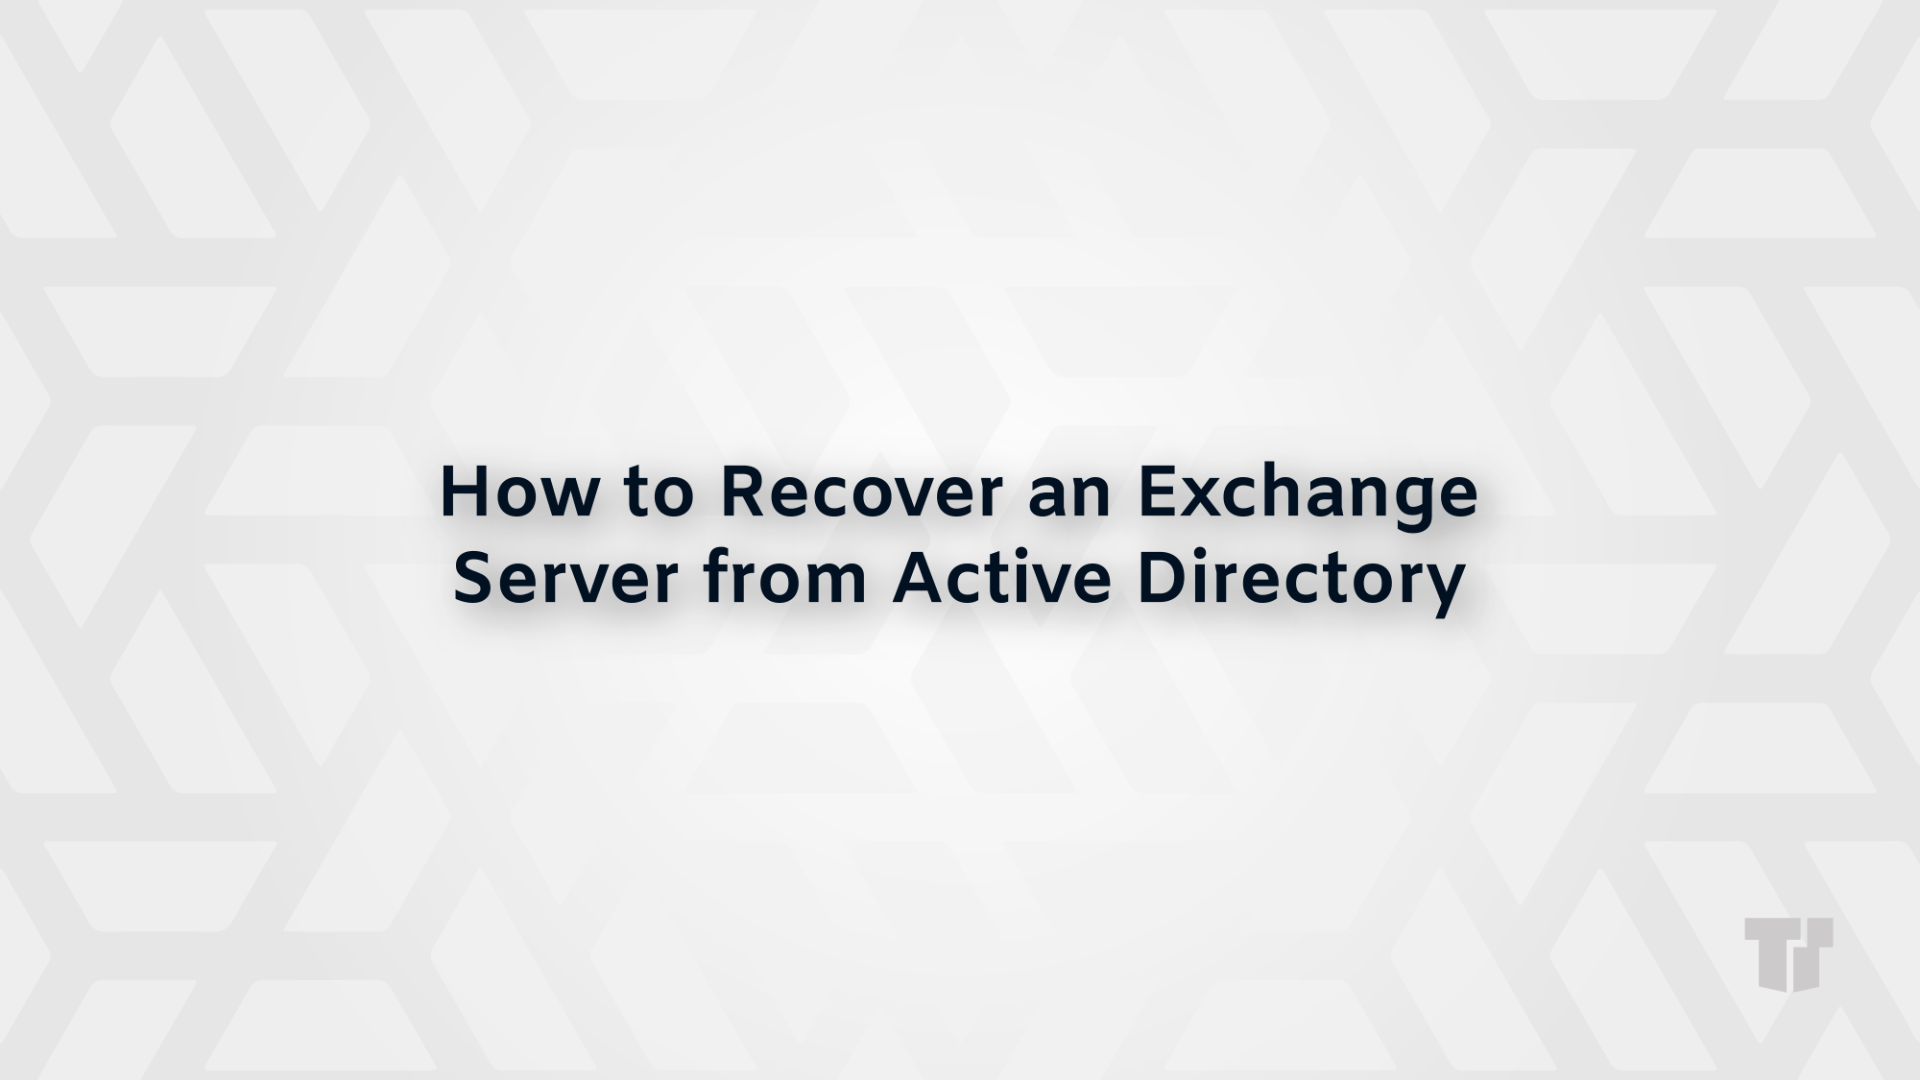 How to Recover an Exchange Server from Active Directory cover image